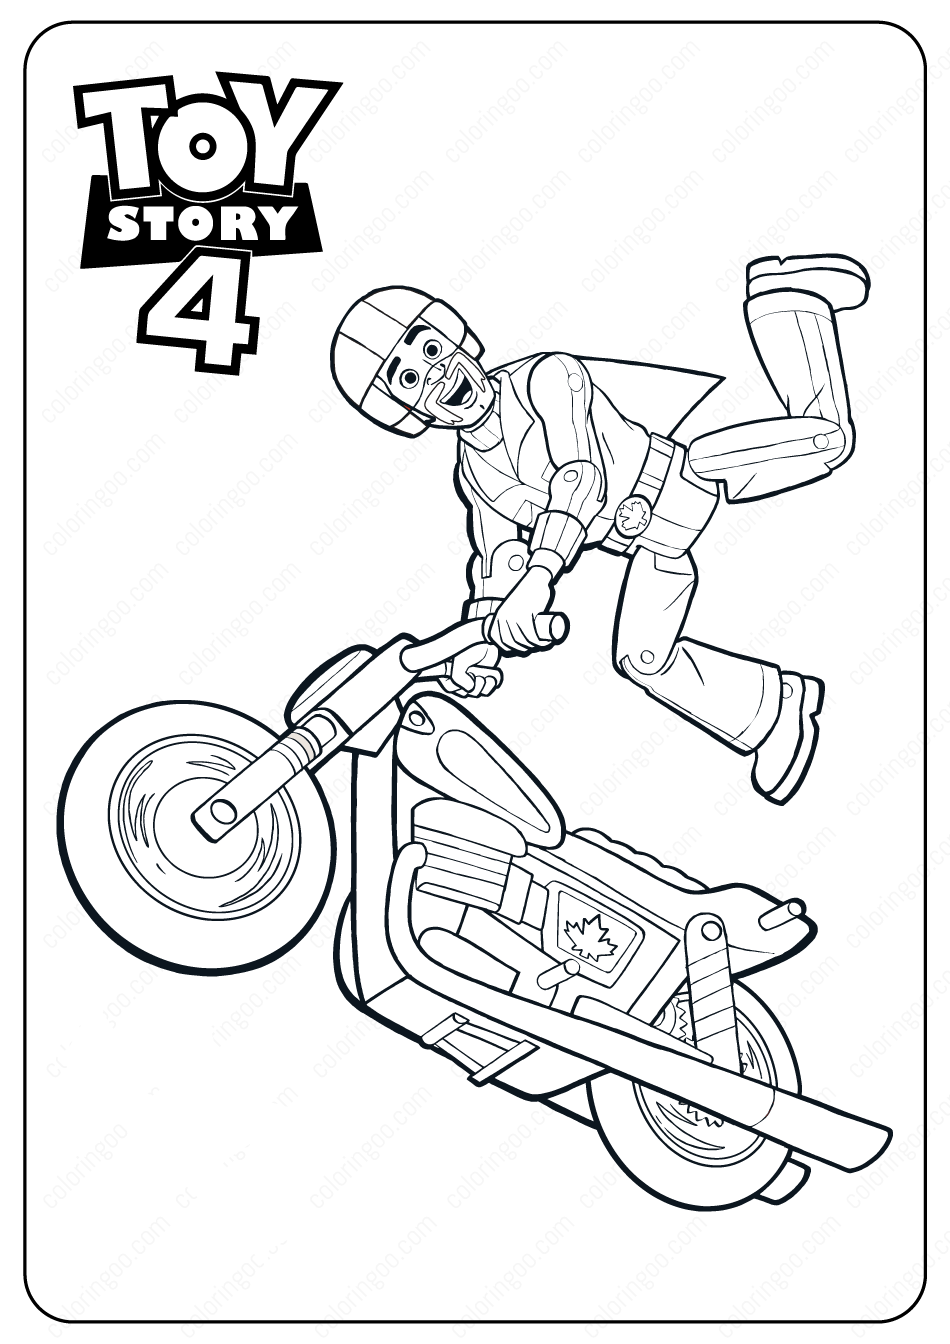 Free Printable Toy Story 4 Duke Caboom PDF Coloring Pages